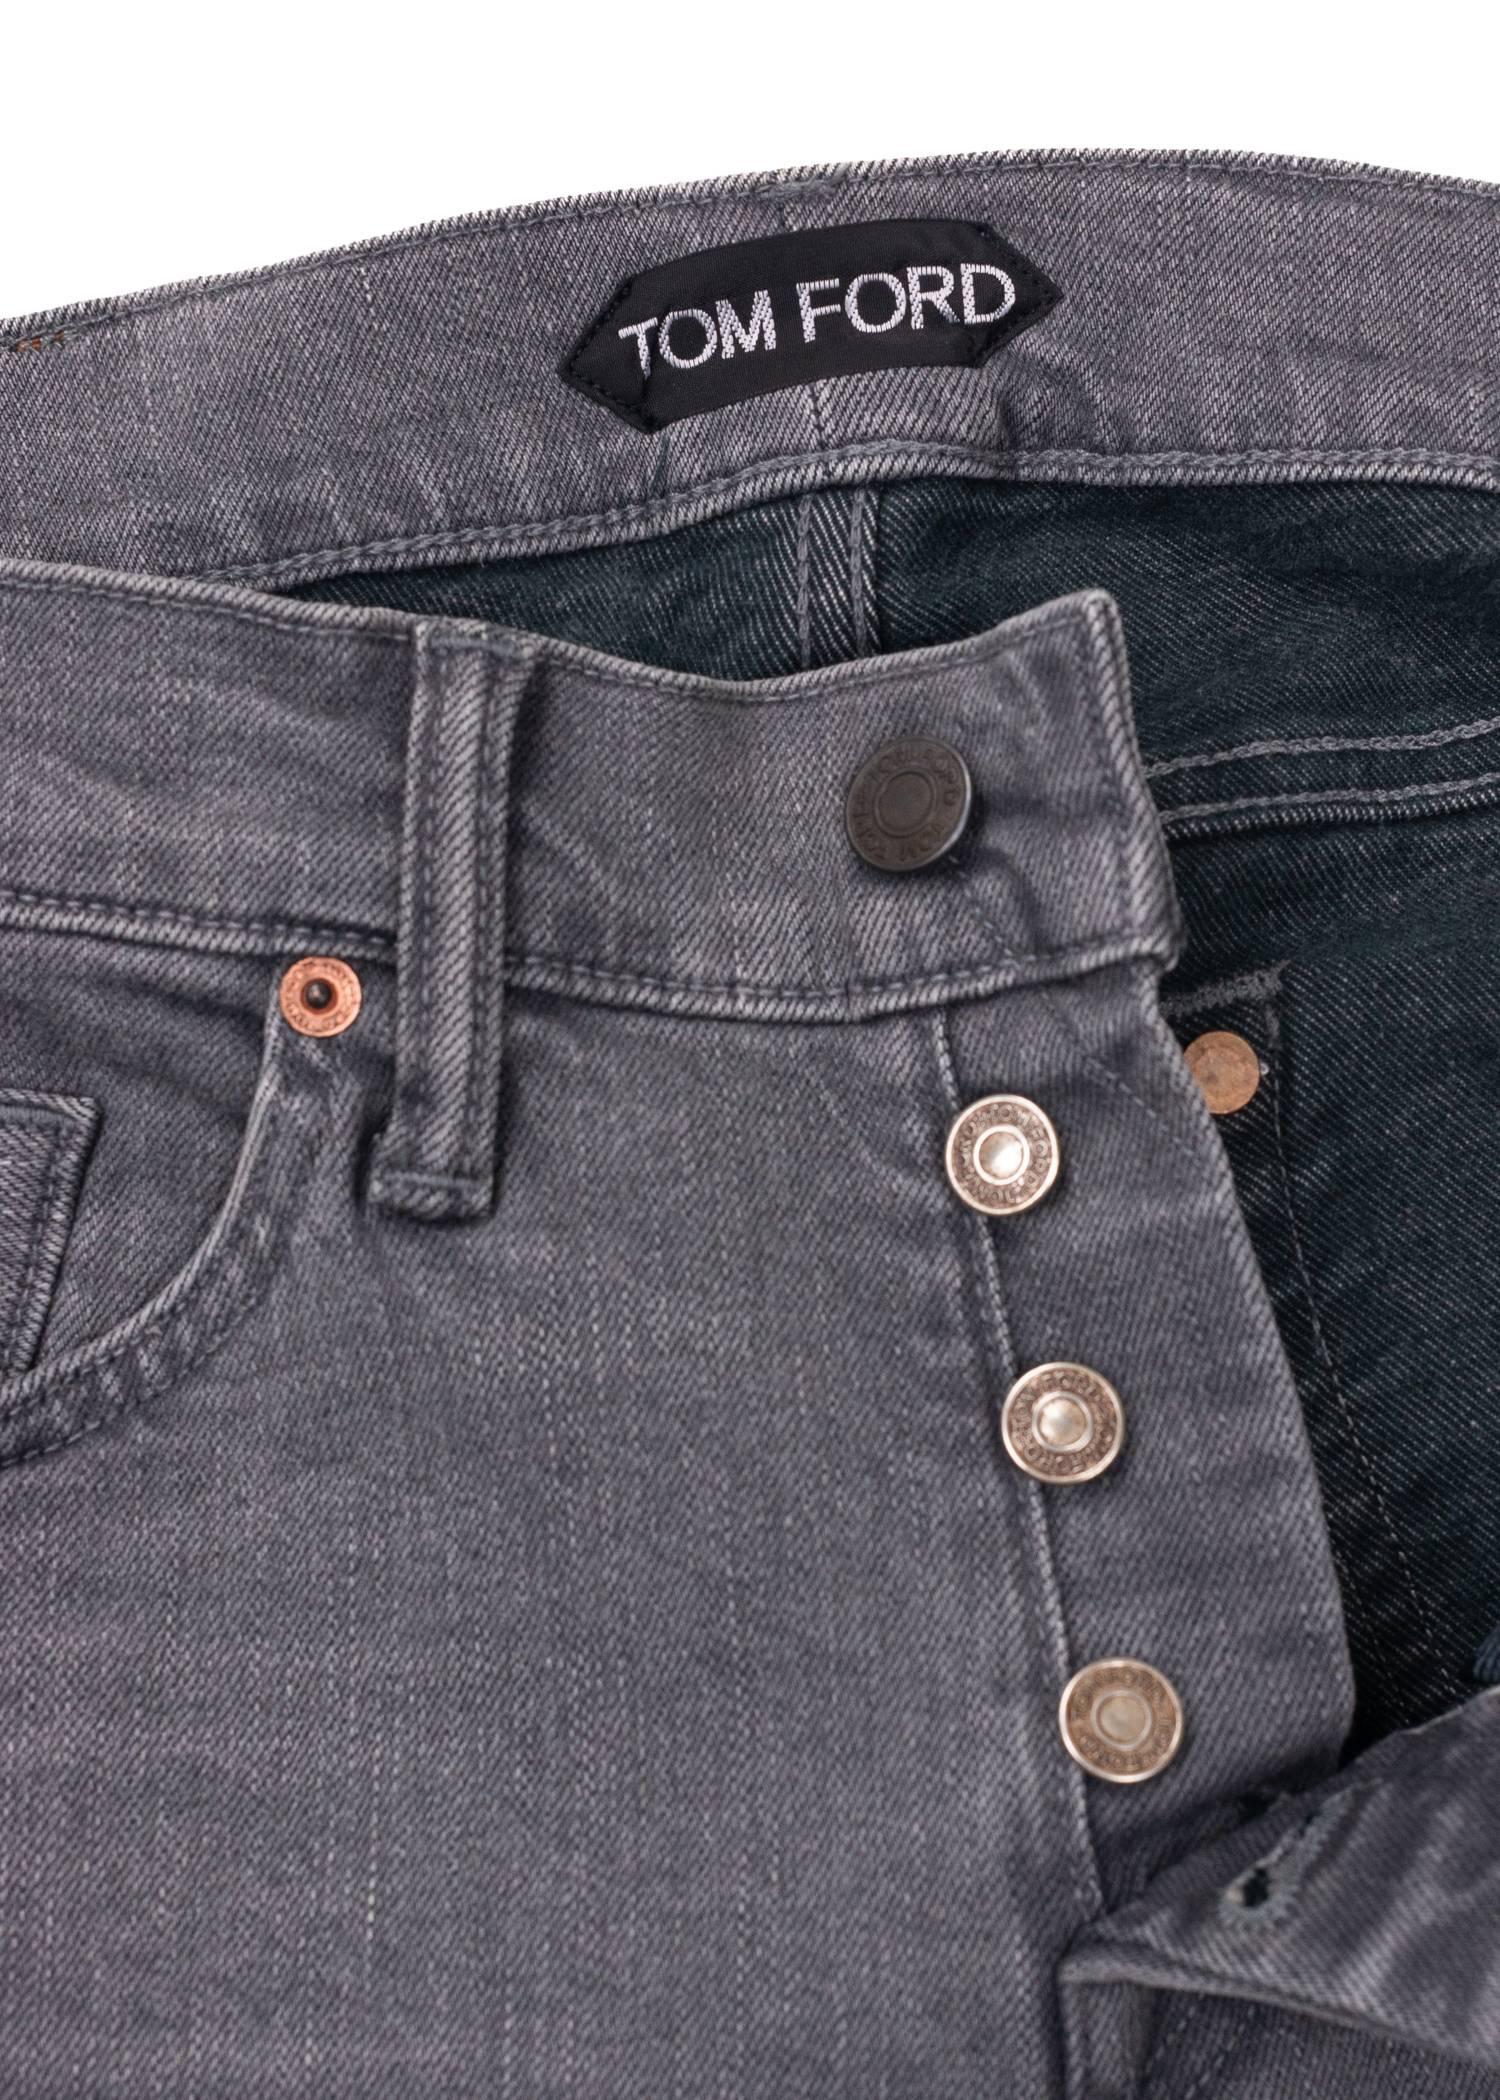 tom ford jeans sale